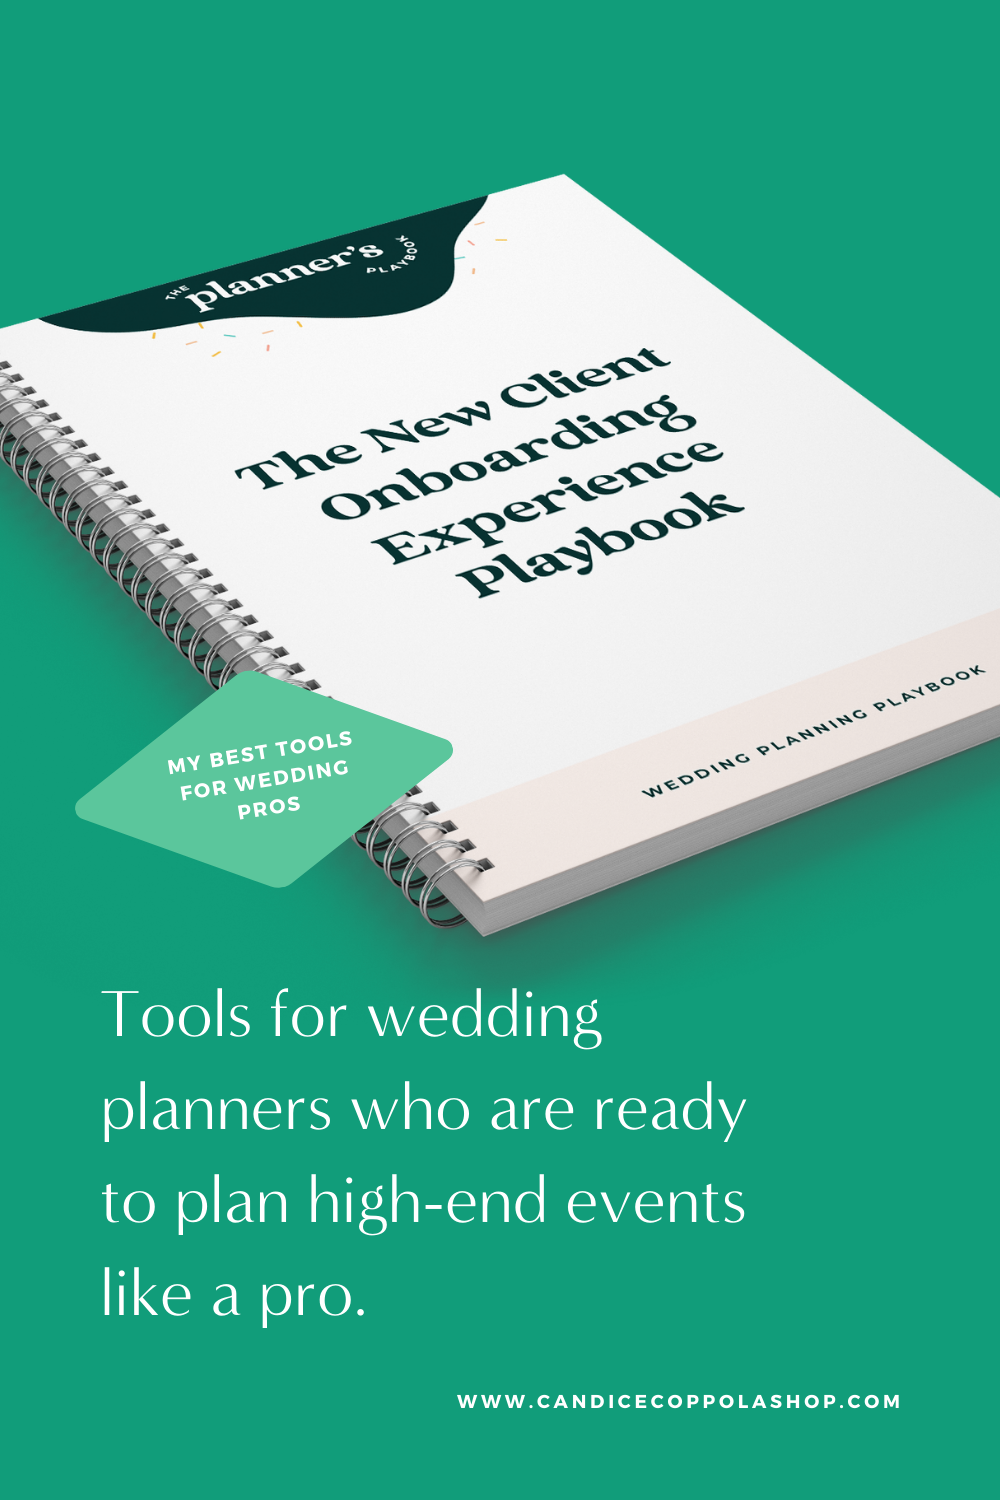 Are you a wedding planner looking for business tools to grow your business? Check out our new client onboarding guide, created just for wedding planners. The onboarding phase is a critical stage in the planning process–it's where you take your relationship with your client to the next level… and you must get it right. With our onboarding framework you'll save time, build your brand, and create a lasting relationship with your clients in the weeks and months to come.